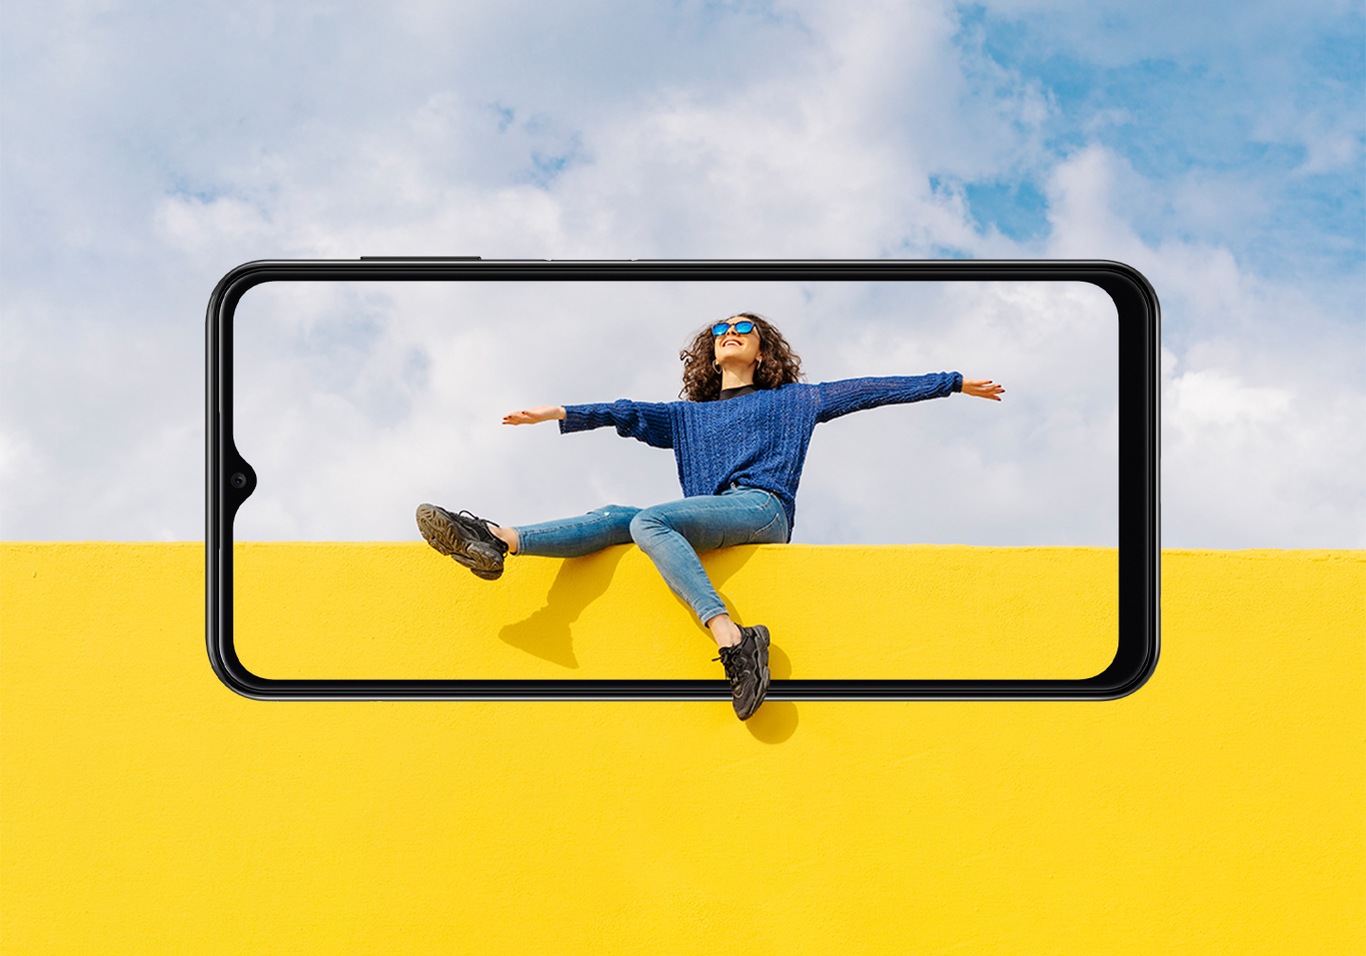 Samsung Galaxy A13 specs and features. Front view. A young woman sitting on yellow wall against cloudy sky looking up. Her legs and the wall and sky extend outside of the display.